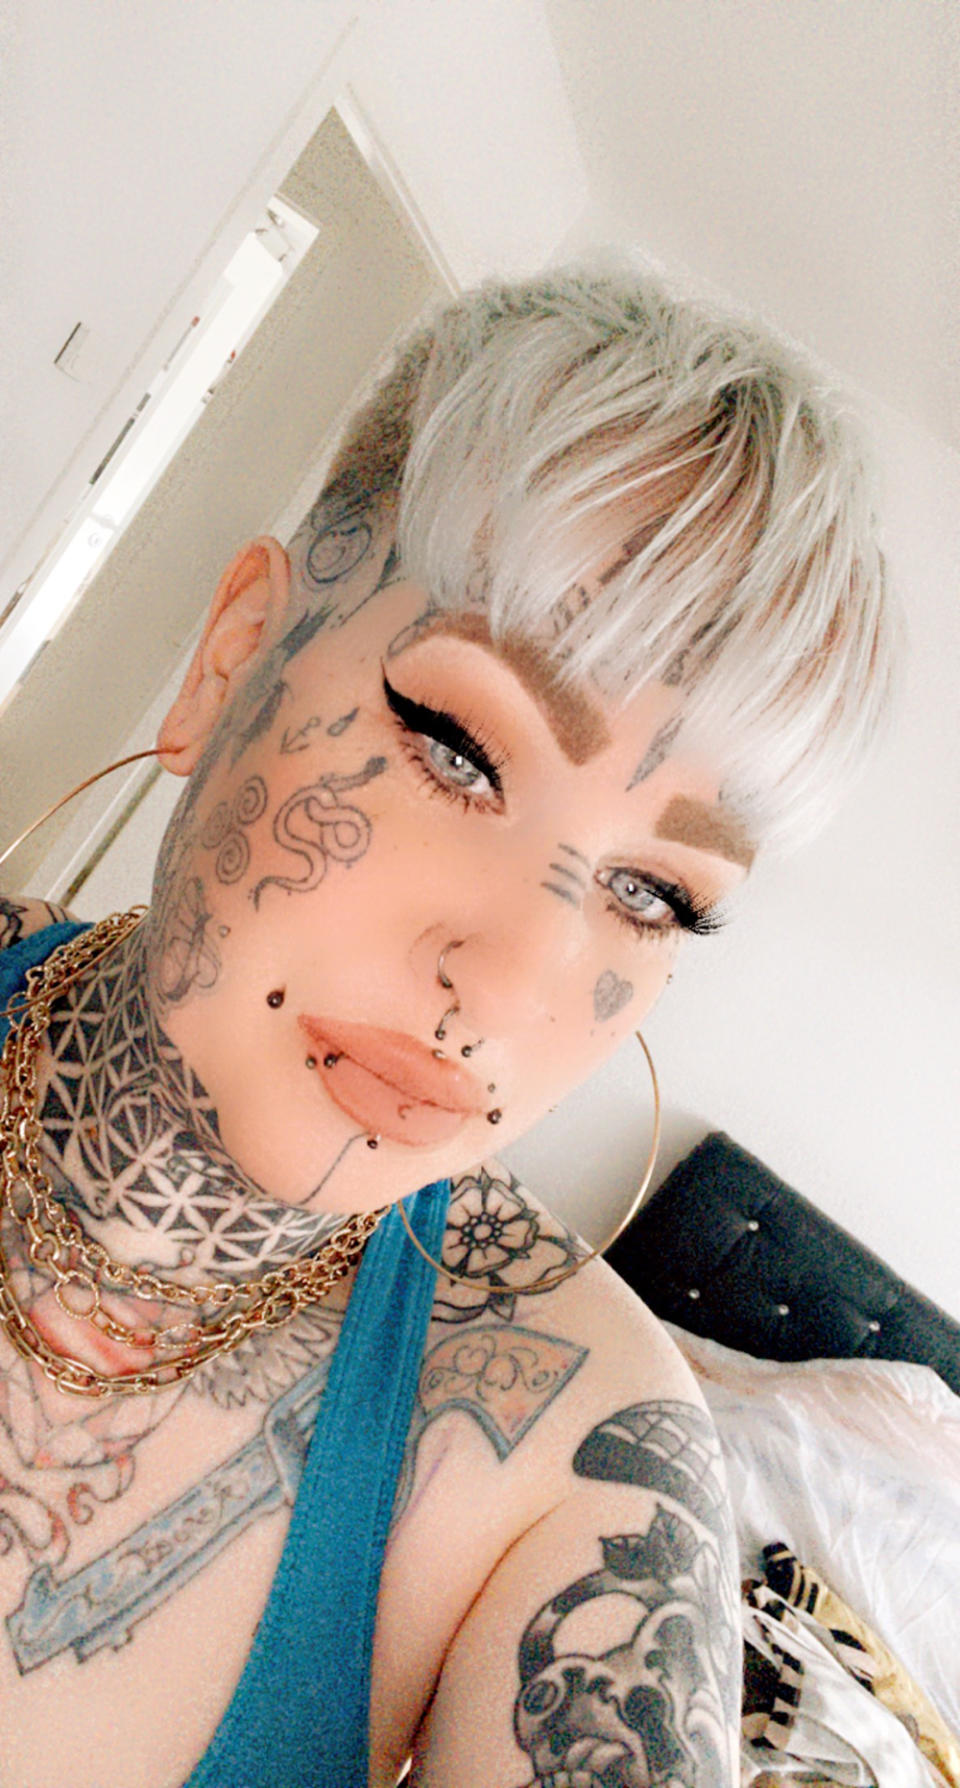 Sabrina showing off her face tattoos (Collect/PA Real Life)